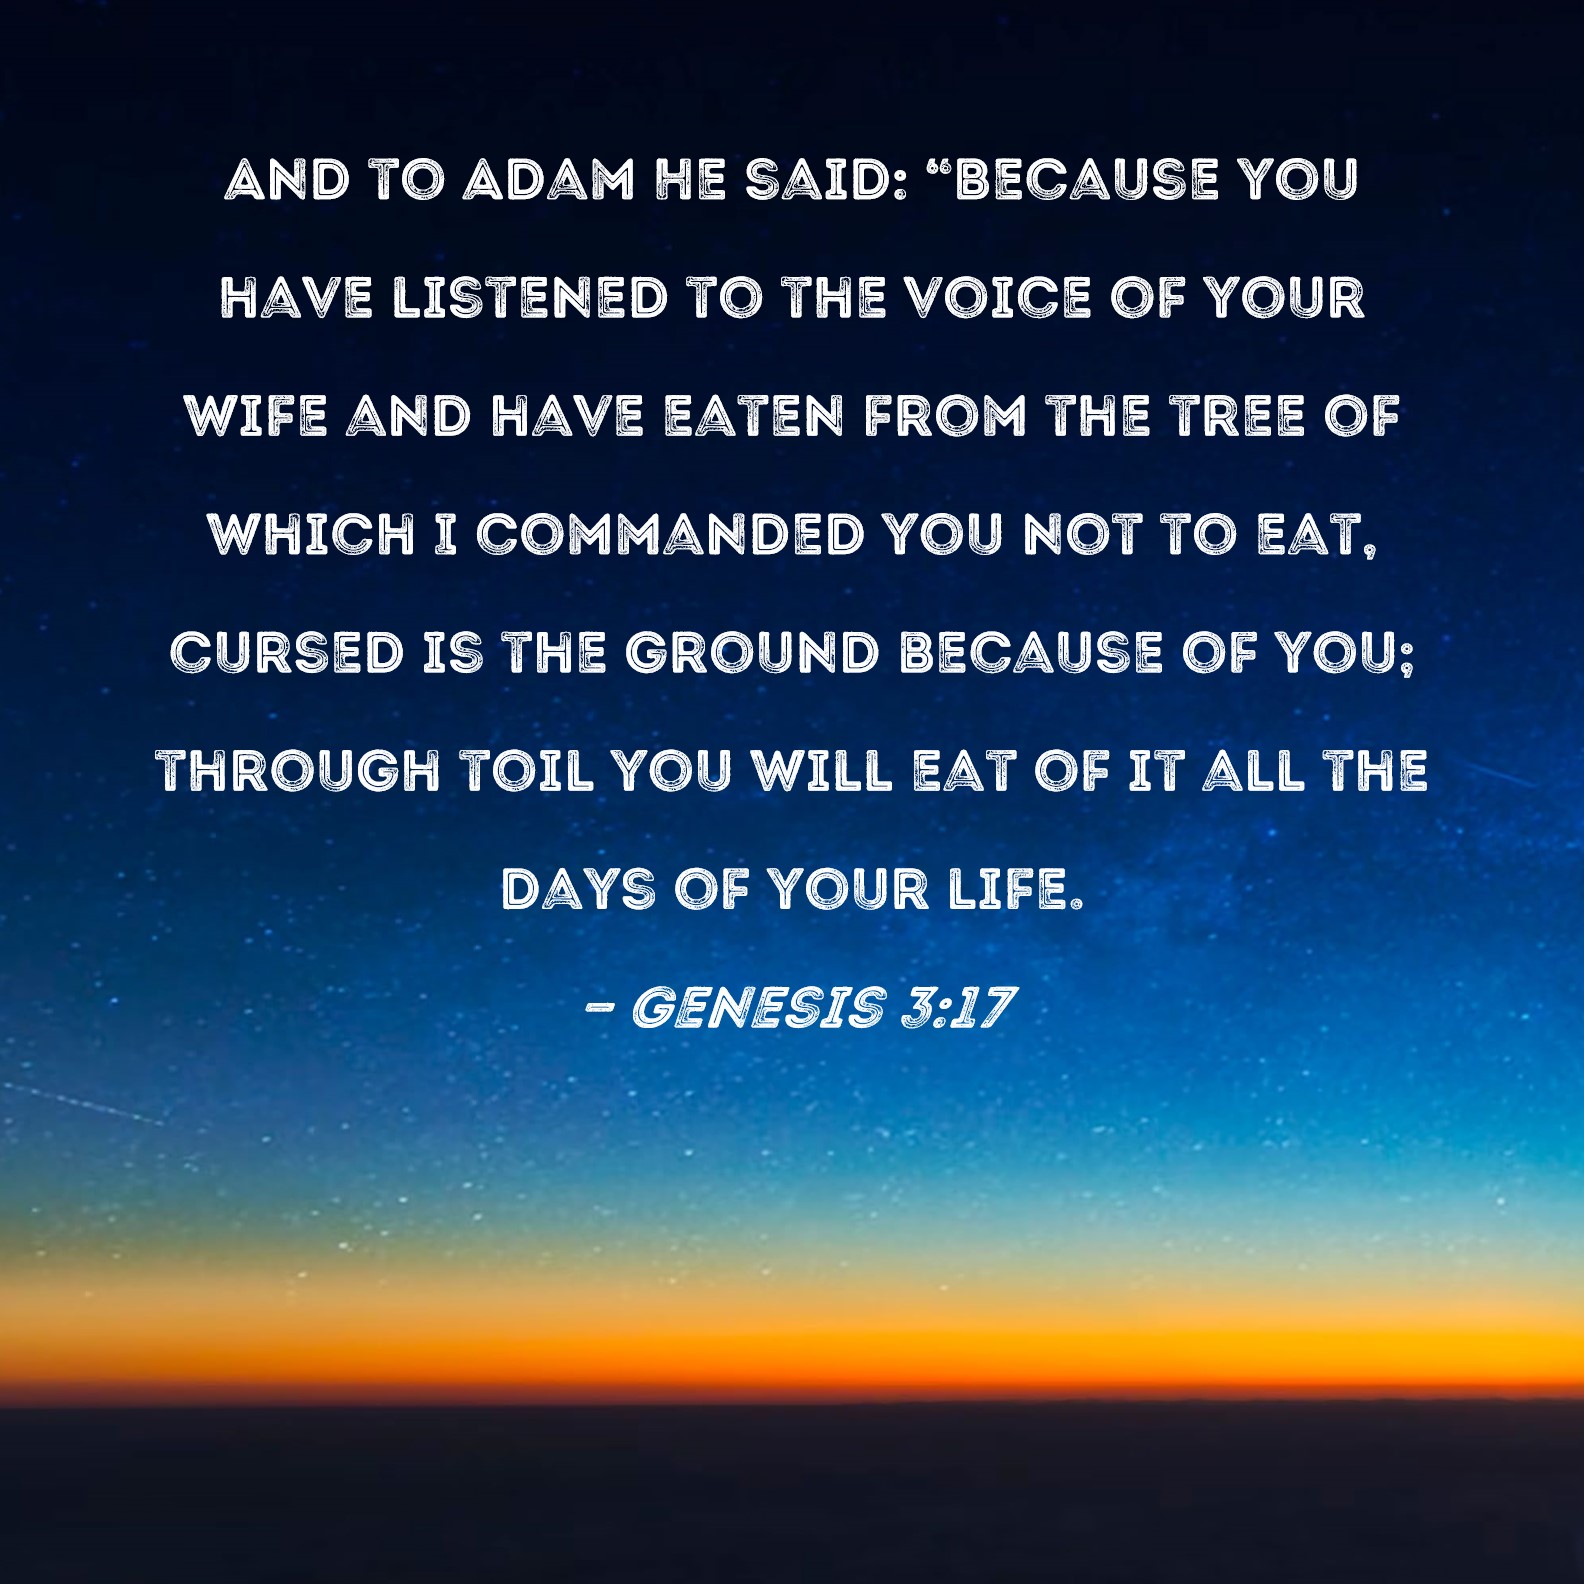 Genesis 3:17 And to Adam He said: Because you have listened to the voice of  your wife and have eaten from the tree of which I commanded you not to eat,  cursed